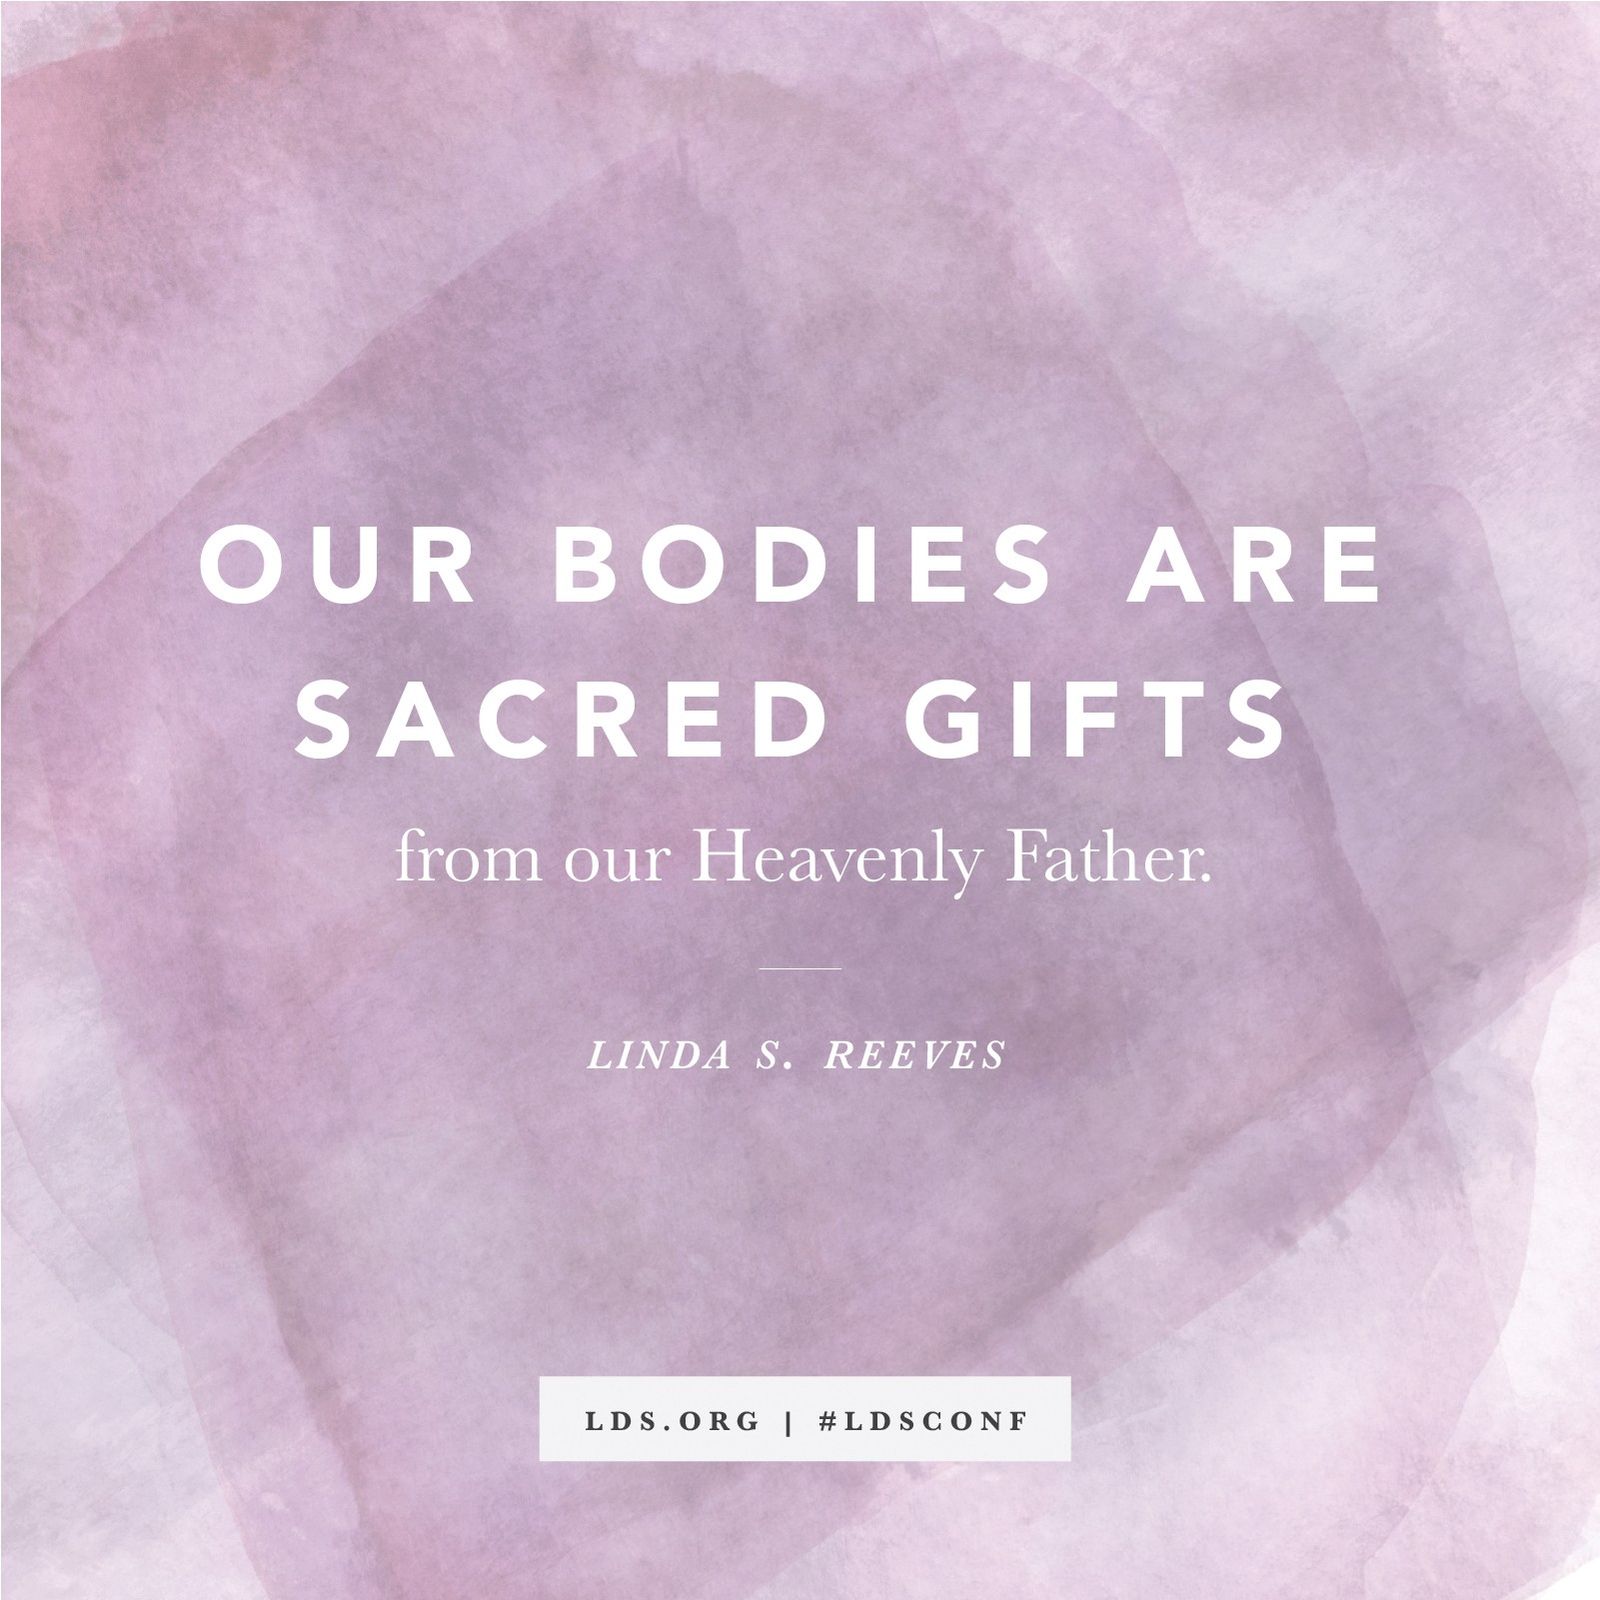 “Our bodies are sacred gifts from our Heavenly Father.” —Sister Linda S. Reeves, “Worthy of Our Promised Blessings”